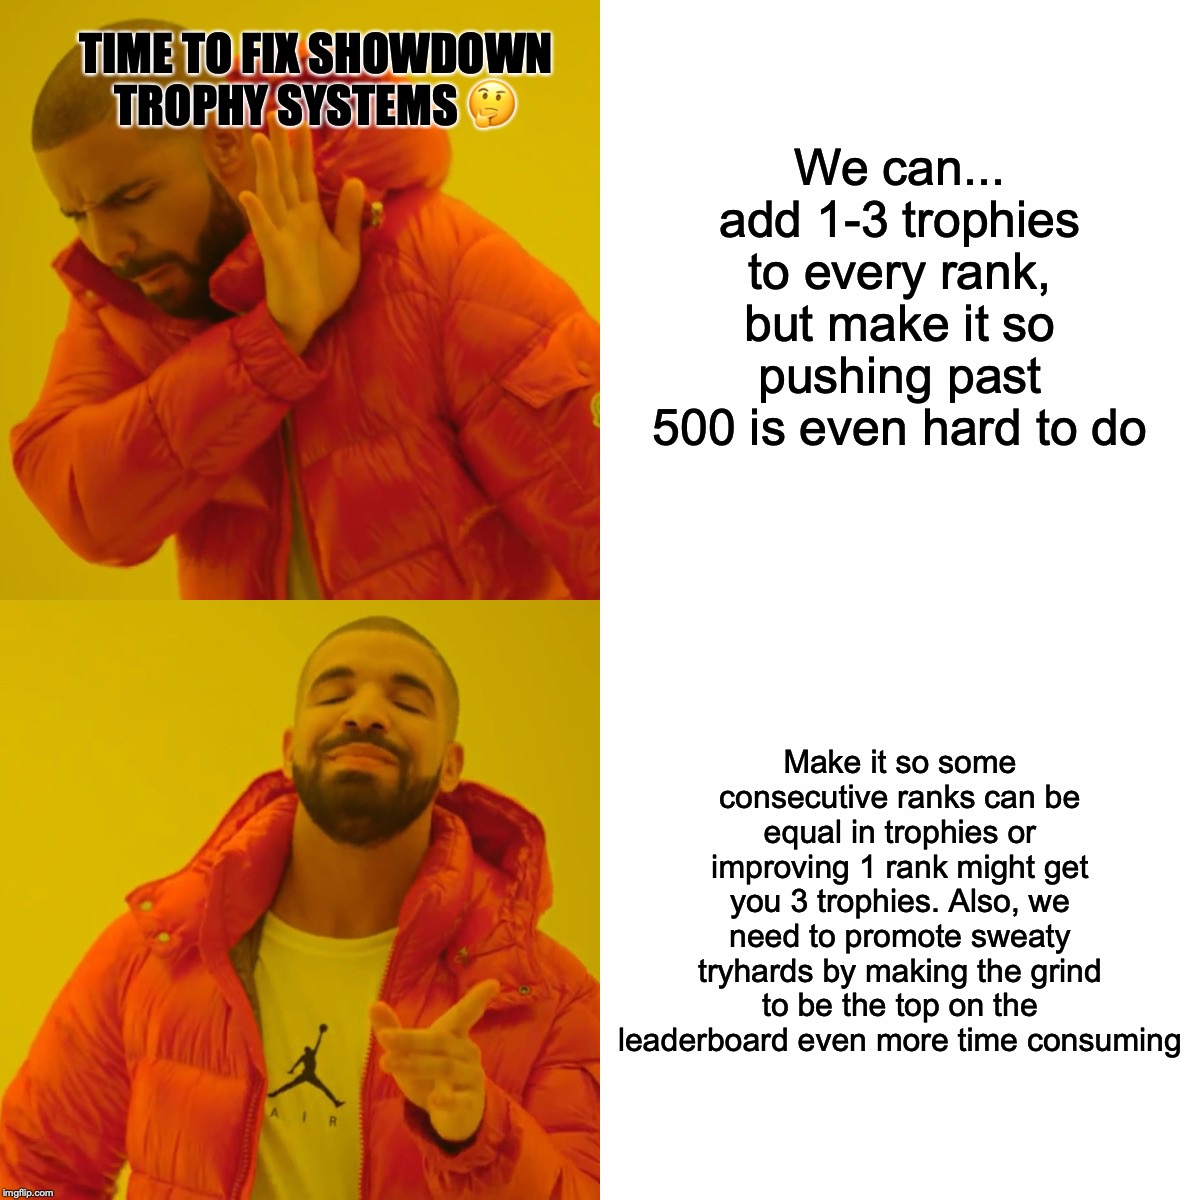 Drake Hotline Bling Meme | TIME TO FIX SHOWDOWN TROPHY SYSTEMS 🤔; We can... add 1-3 trophies to every rank, but make it so pushing past 500 is even hard to do; Make it so some consecutive ranks can be equal in trophies or improving 1 rank might get you 3 trophies. Also, we need to promote sweaty tryhards by making the grind to be the top on the leaderboard even more time consuming | image tagged in memes,drake hotline bling | made w/ Imgflip meme maker